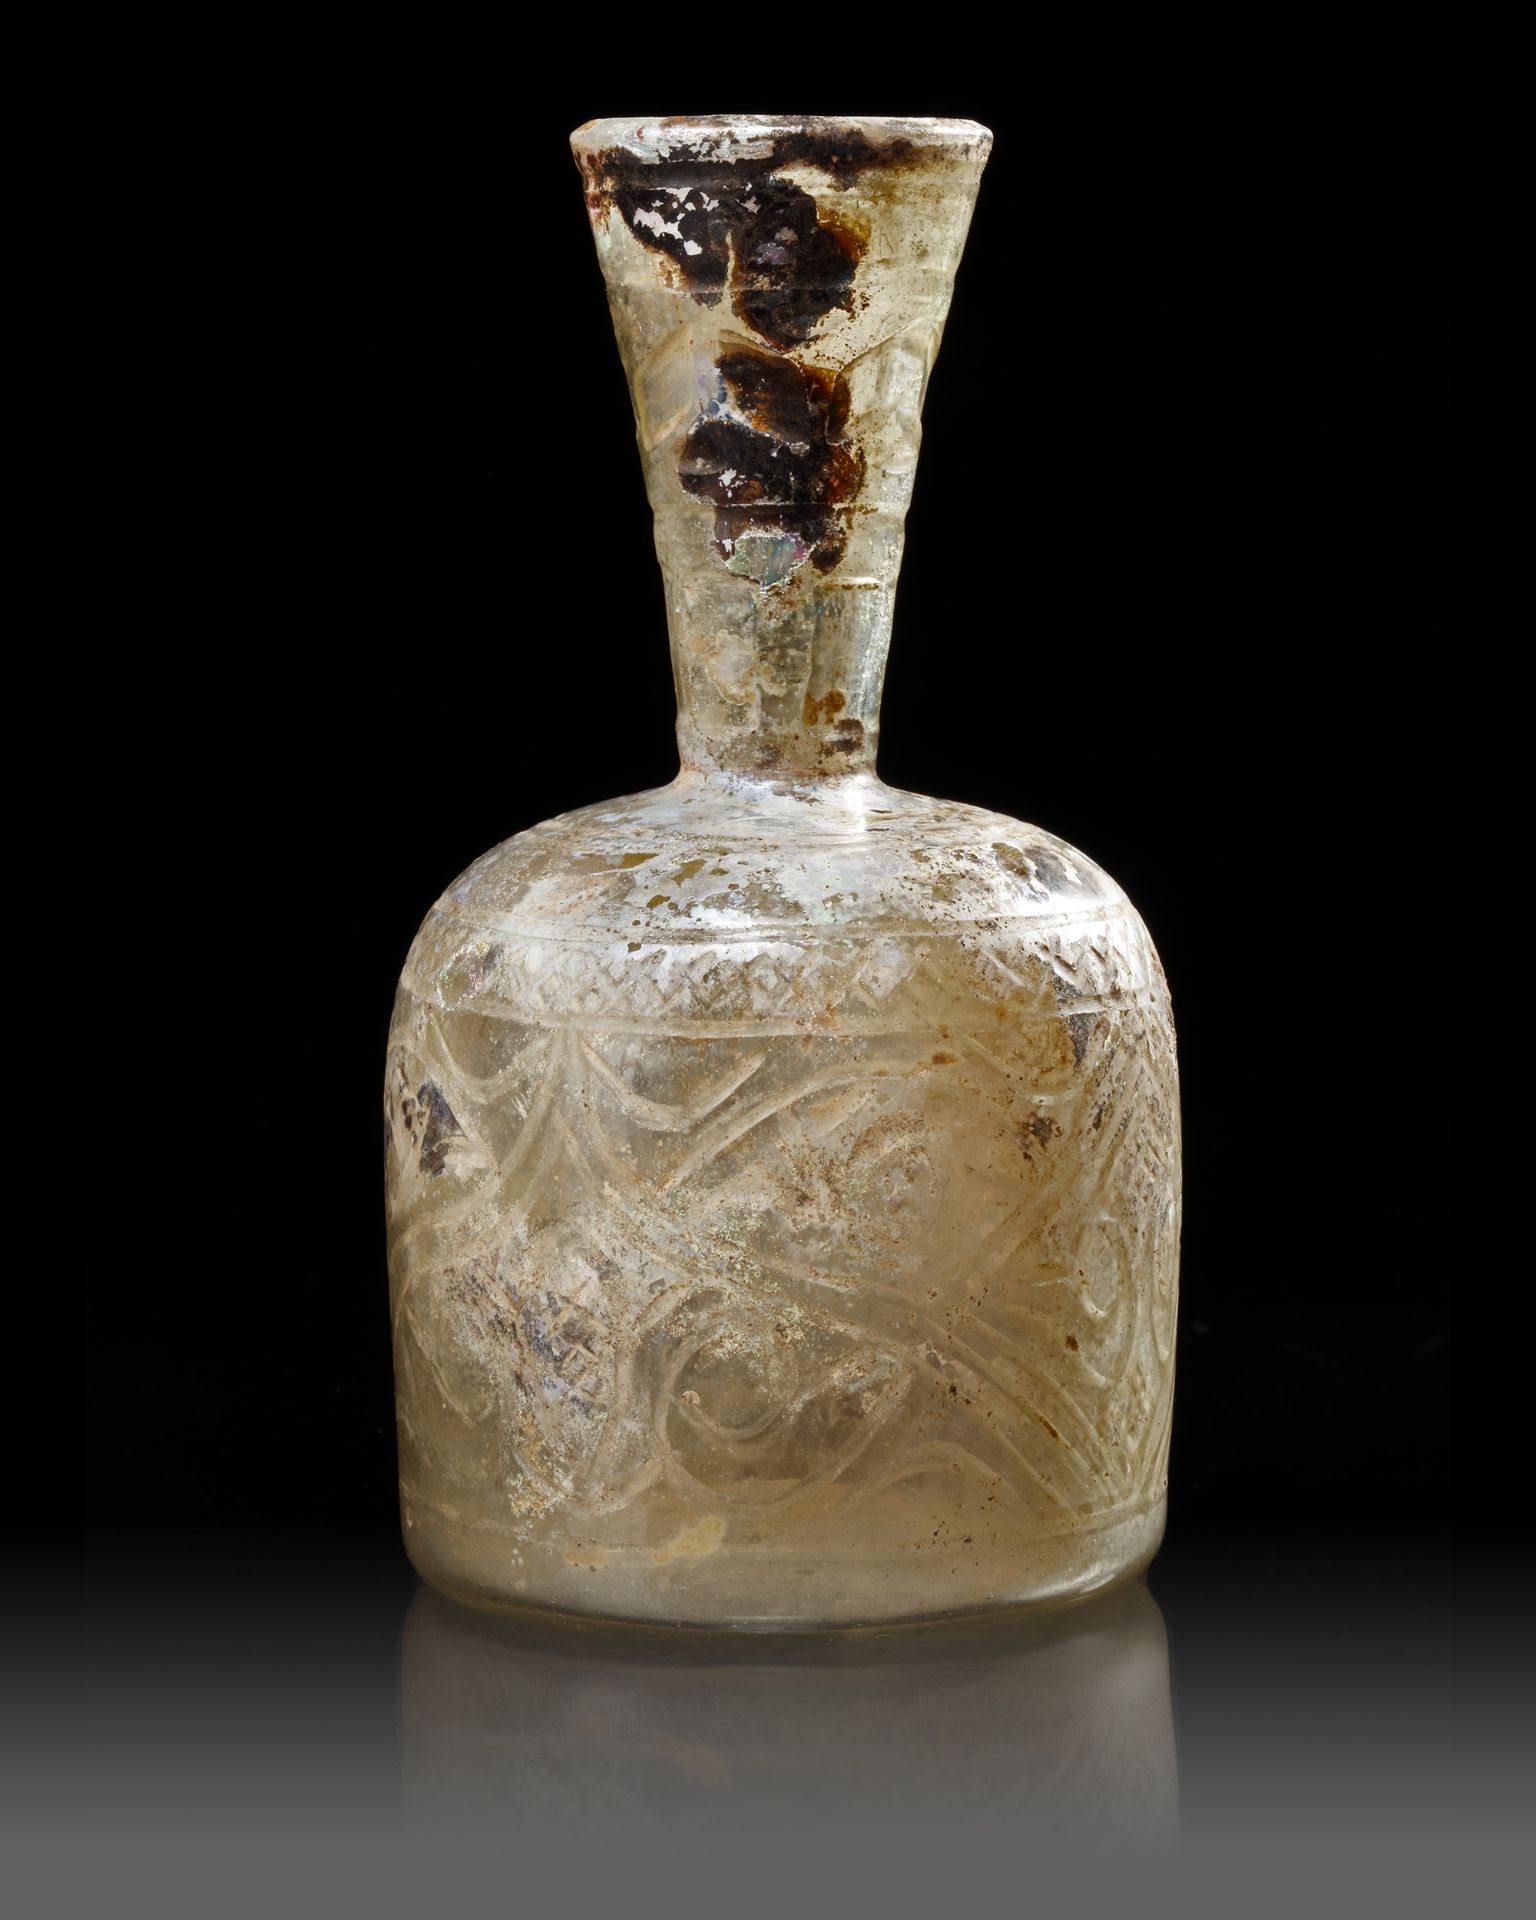 A LARGE WHEEL-CUT CLEAR GLASS FLASK, PERSIA, 9TH-10TH CENTURY - Image 3 of 7